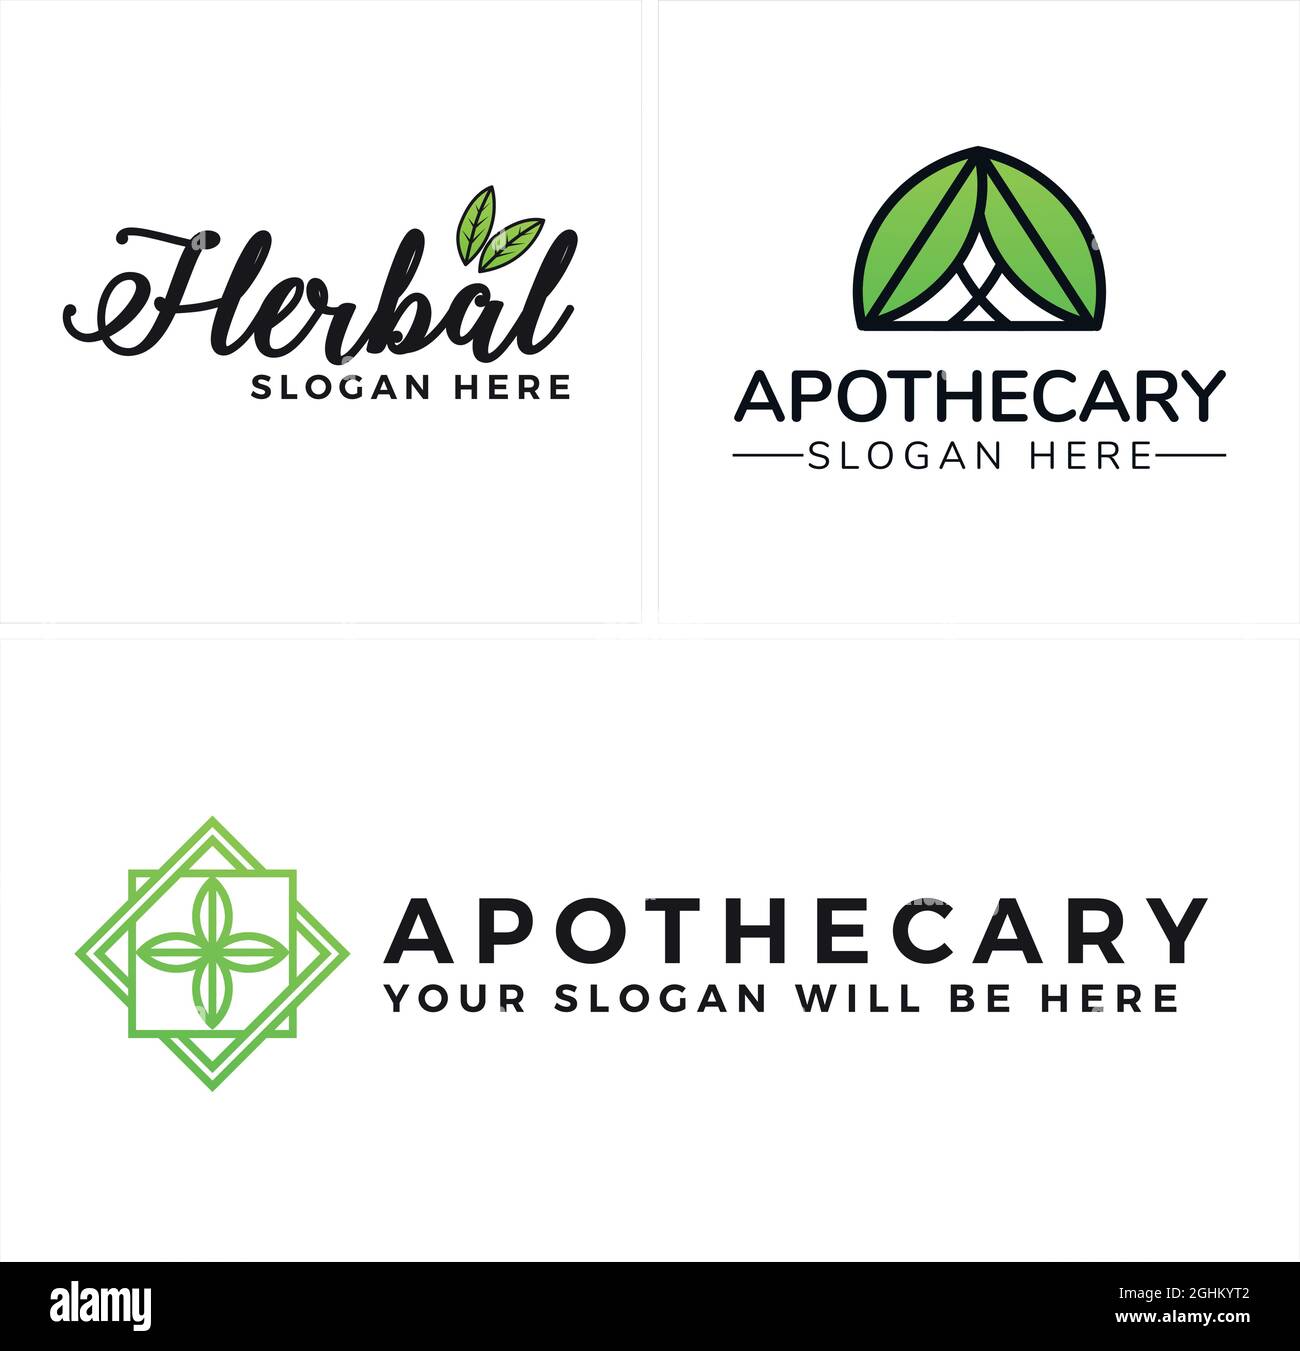 Retail apothecary herbal leaf natural logo design Stock Vector Image ...